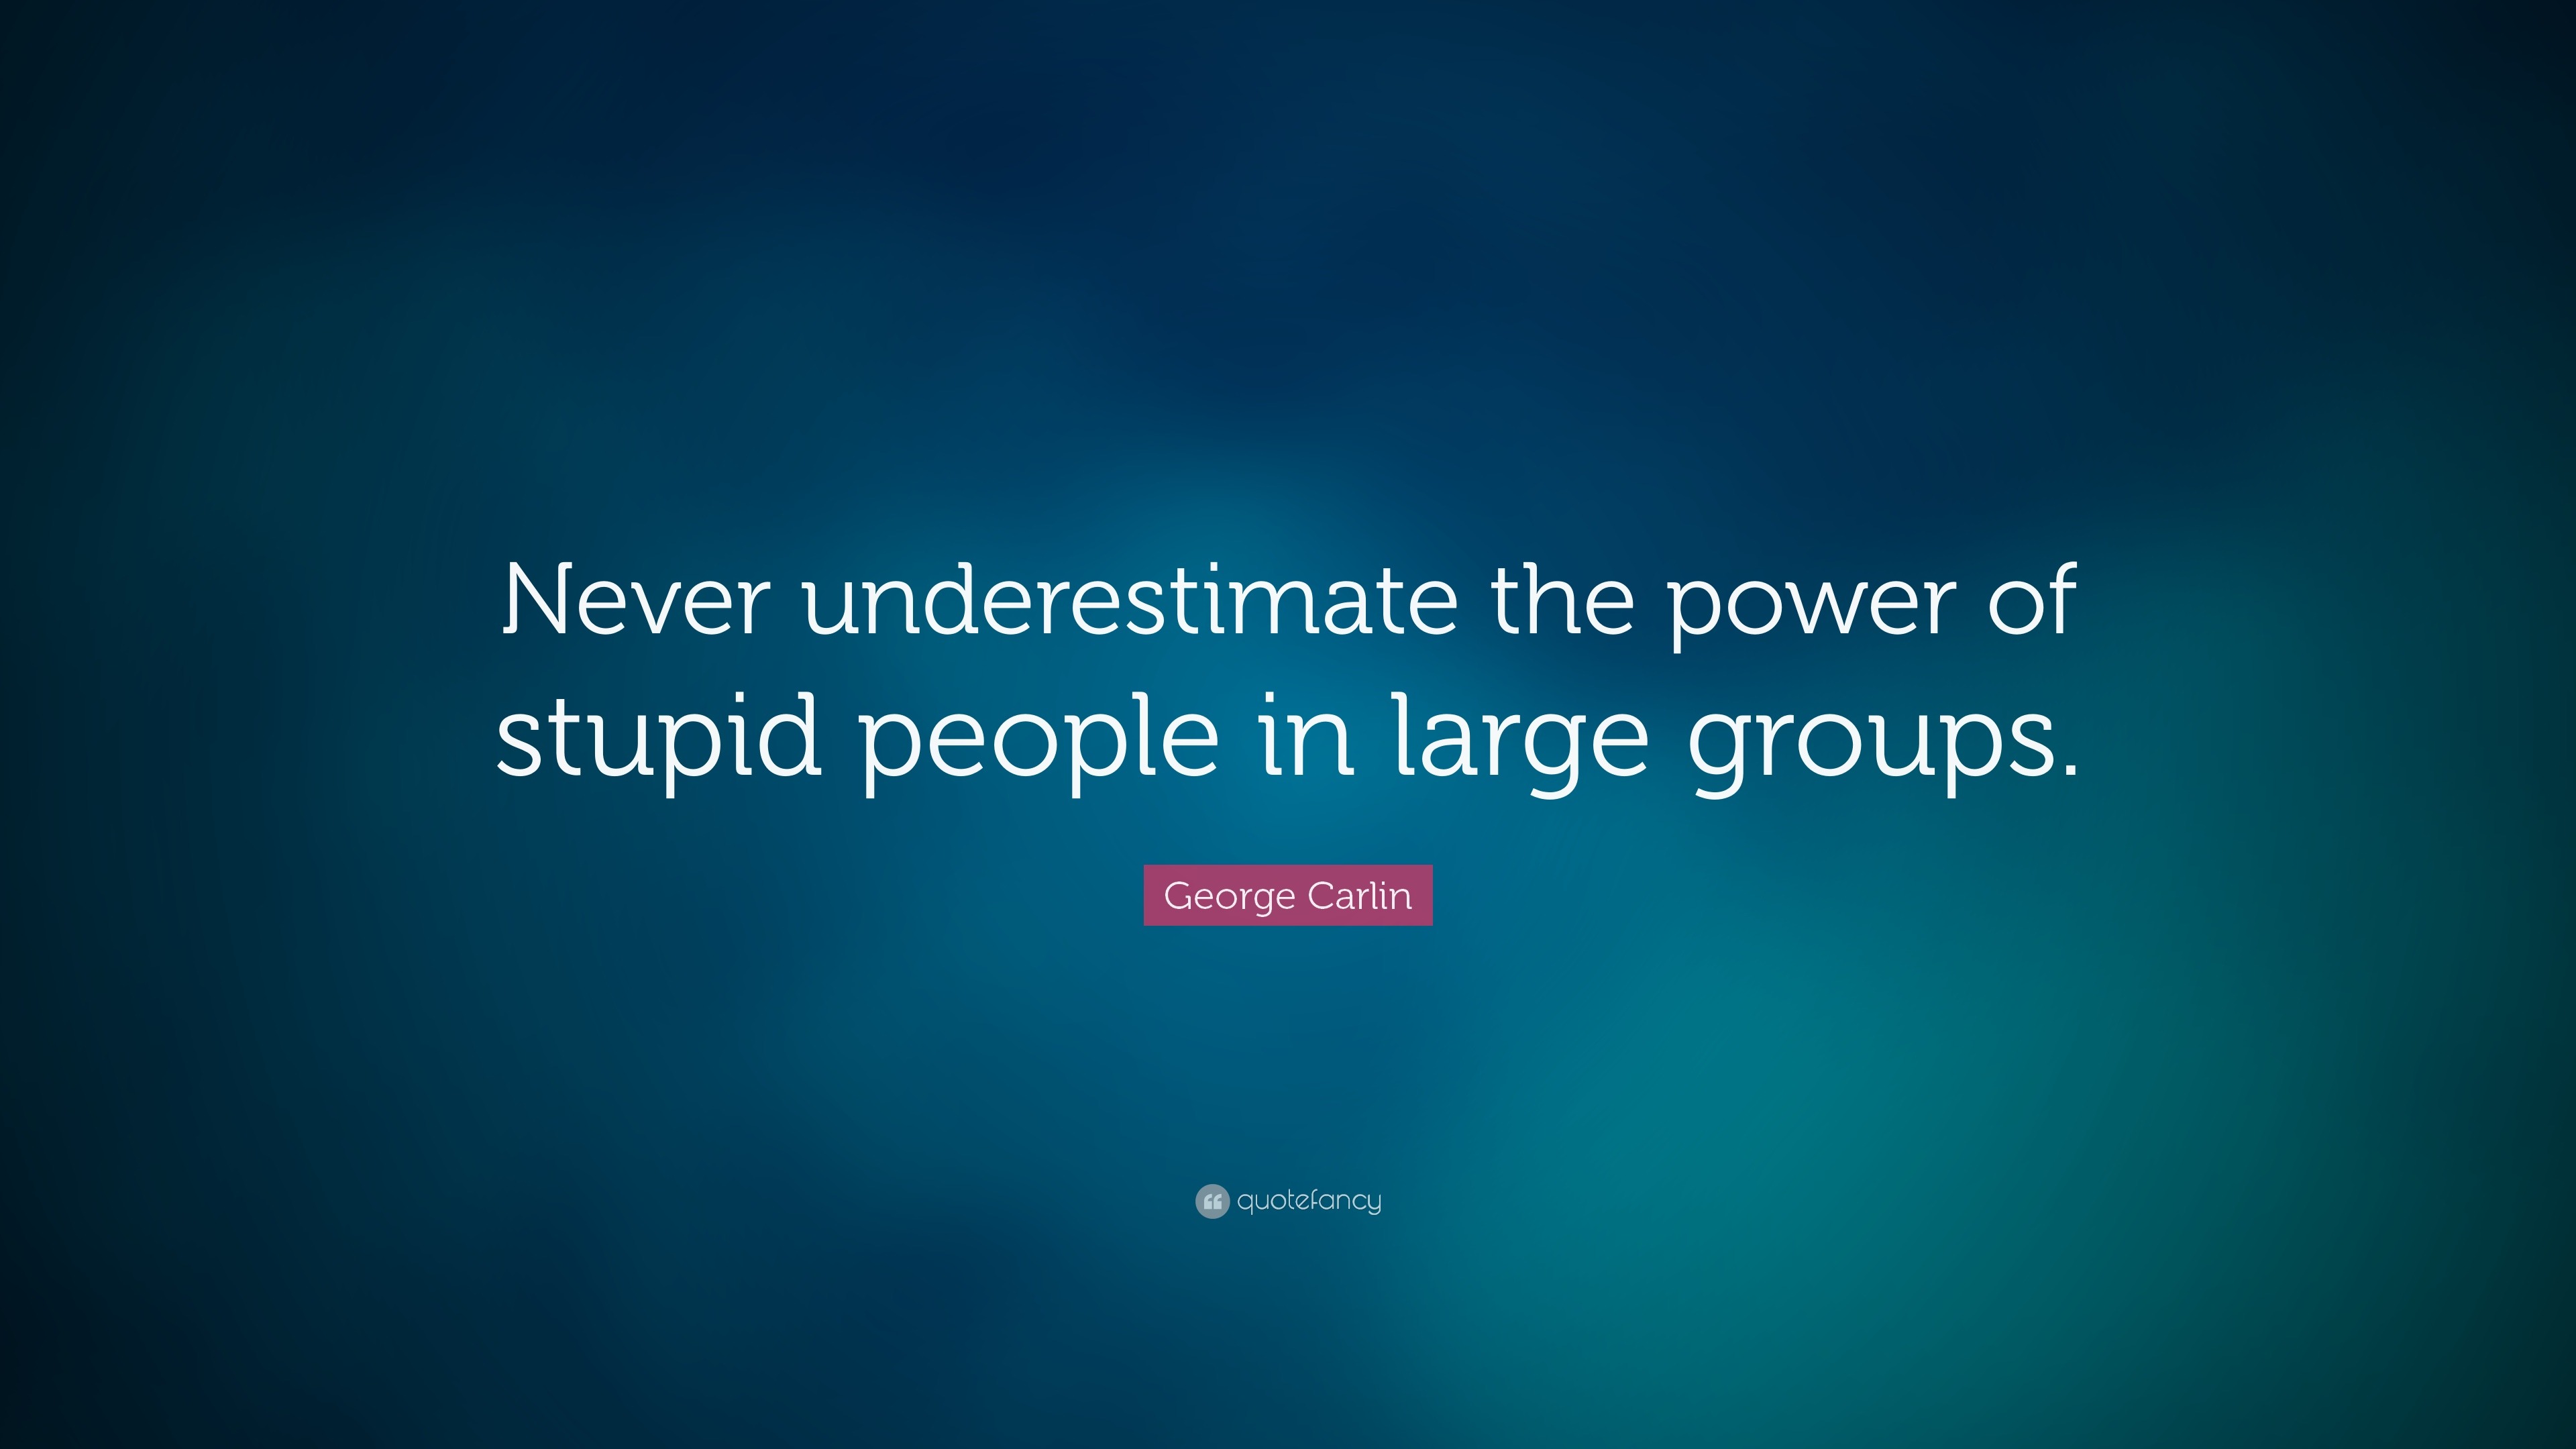 George Carlin Quote: "Never underestimate the power of stupid people in large groups." (17 ...